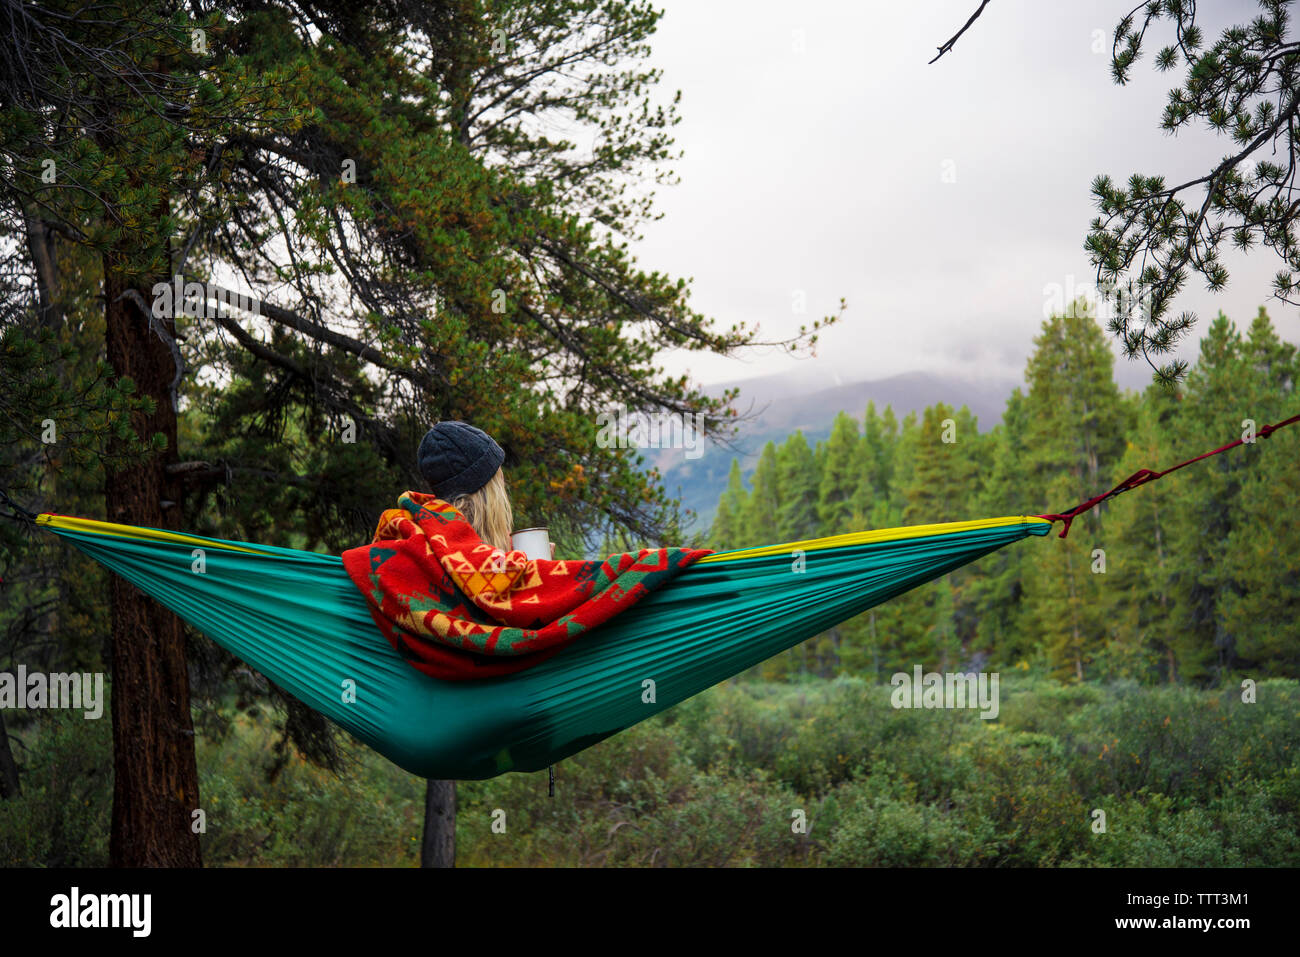 Rear view of woman relaxing on hammock in forest Banque D'Images